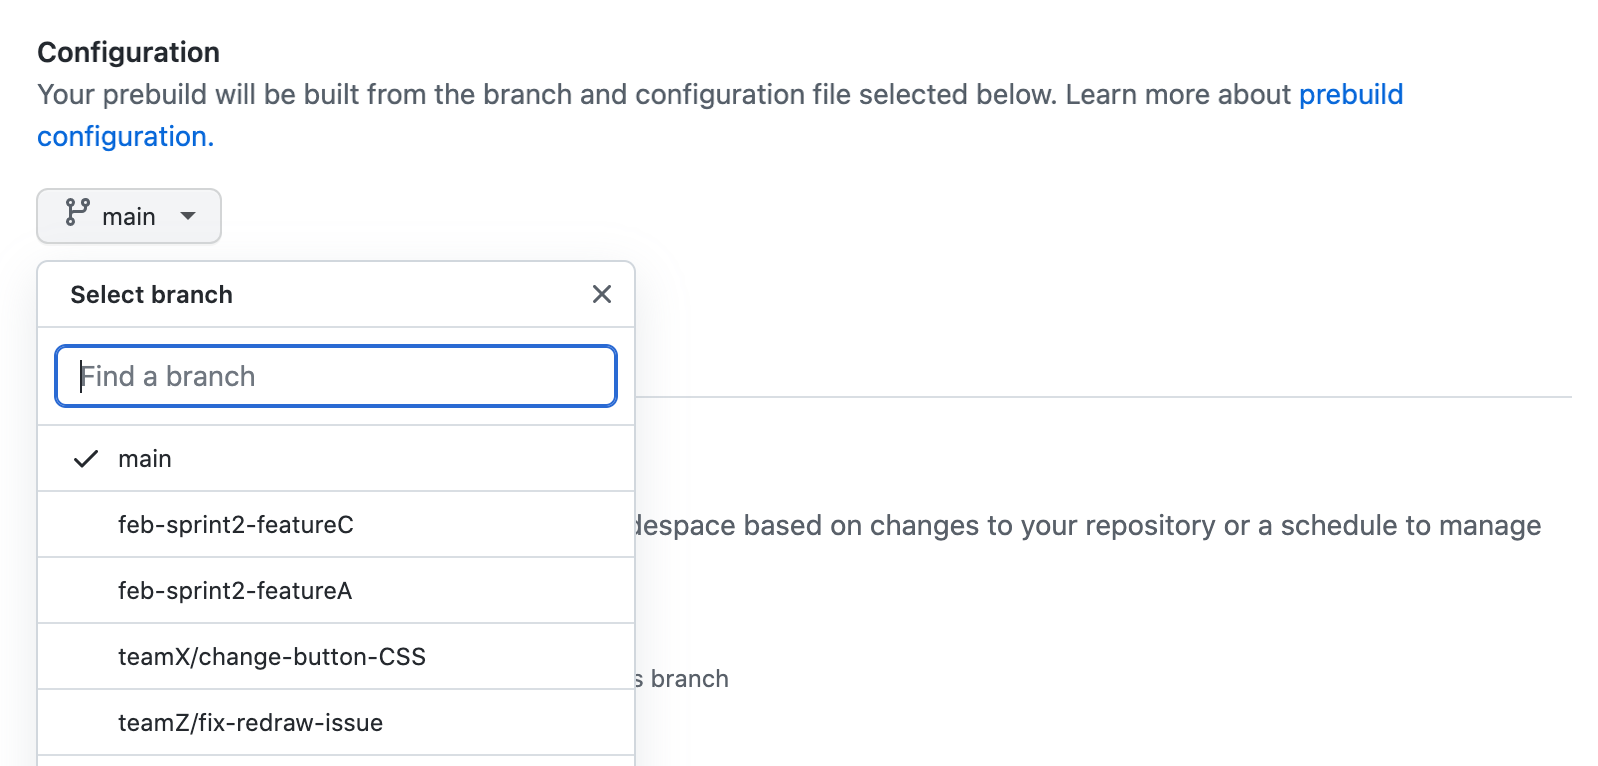 Screenshot of the "Configuration" settings for a prebuild with a dropdown menu listing branches to select. The "main" branch is currently selected.